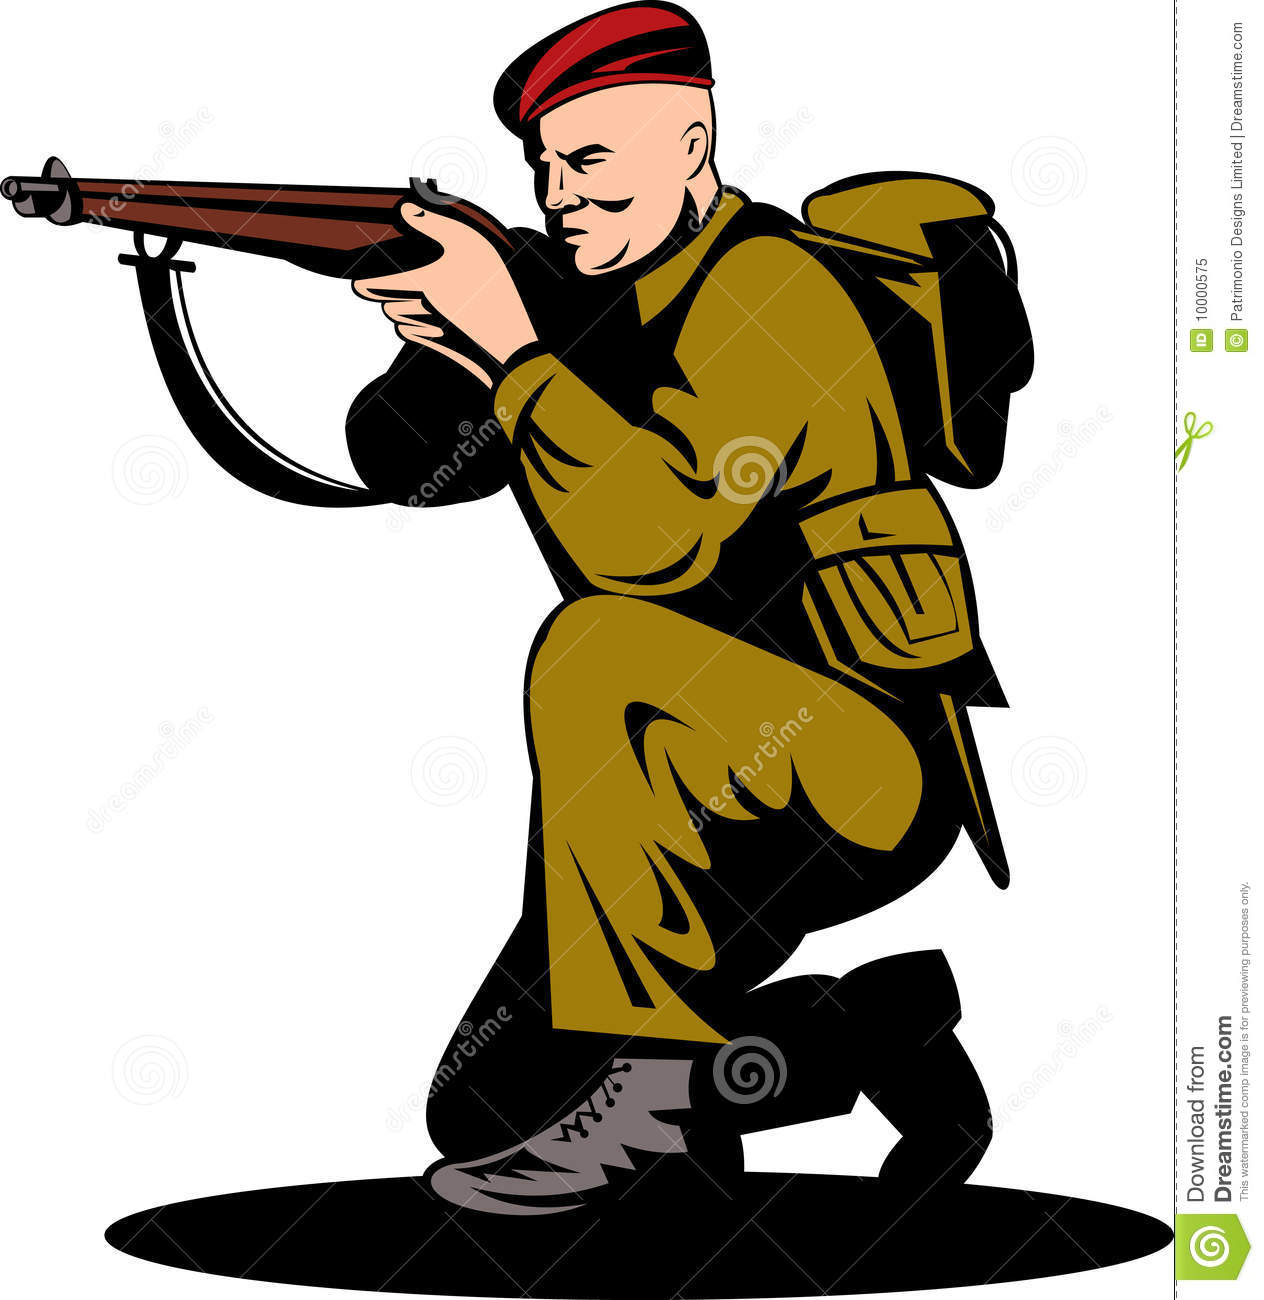 Vector Illustration Of A World War Two British Commando Shooting A